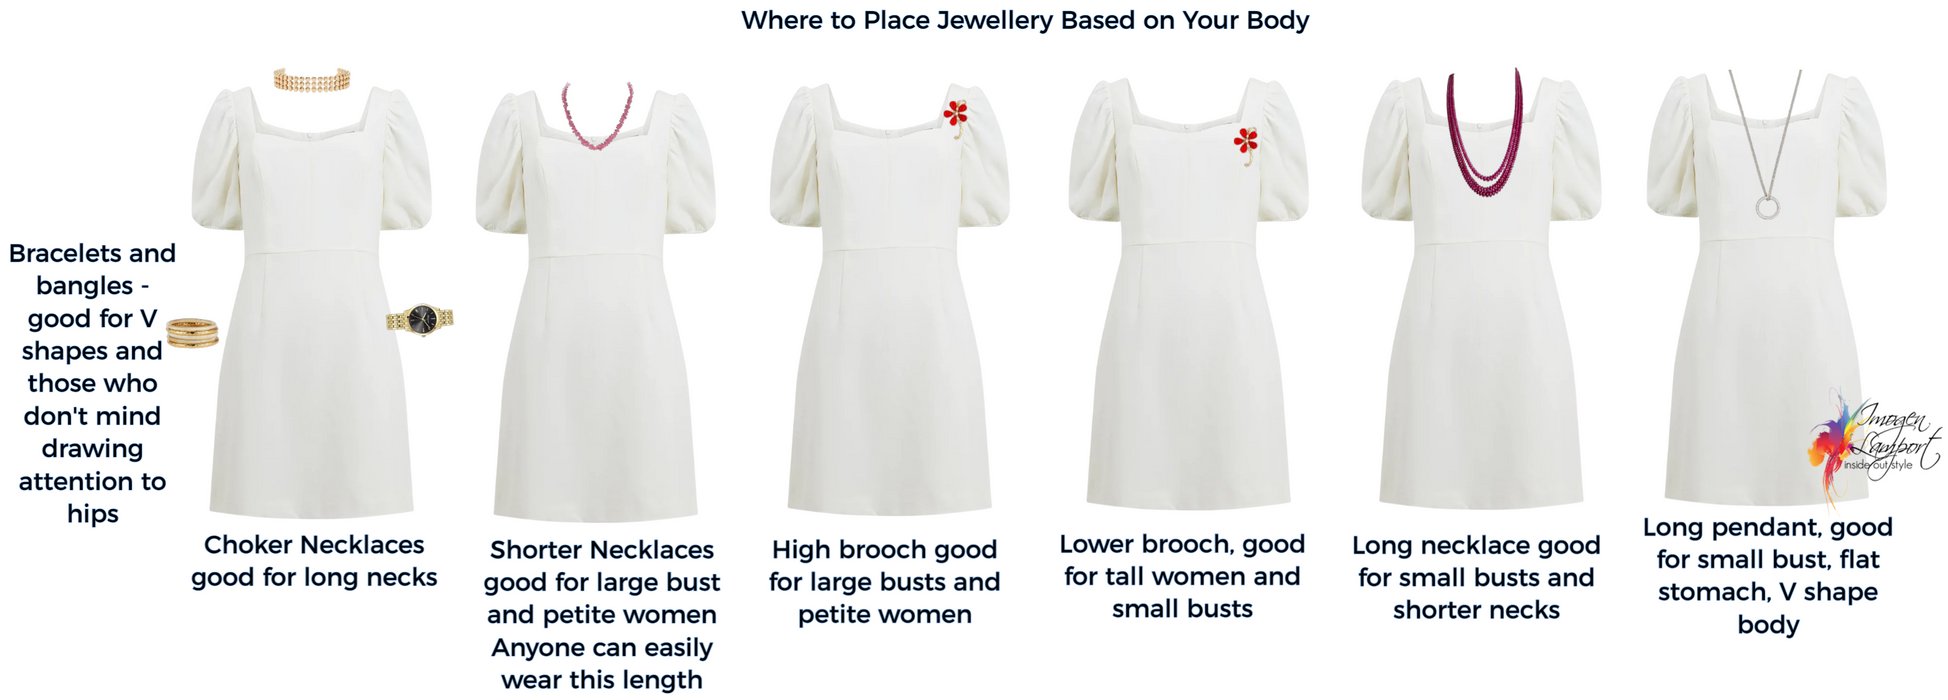 jewellery for your body shape